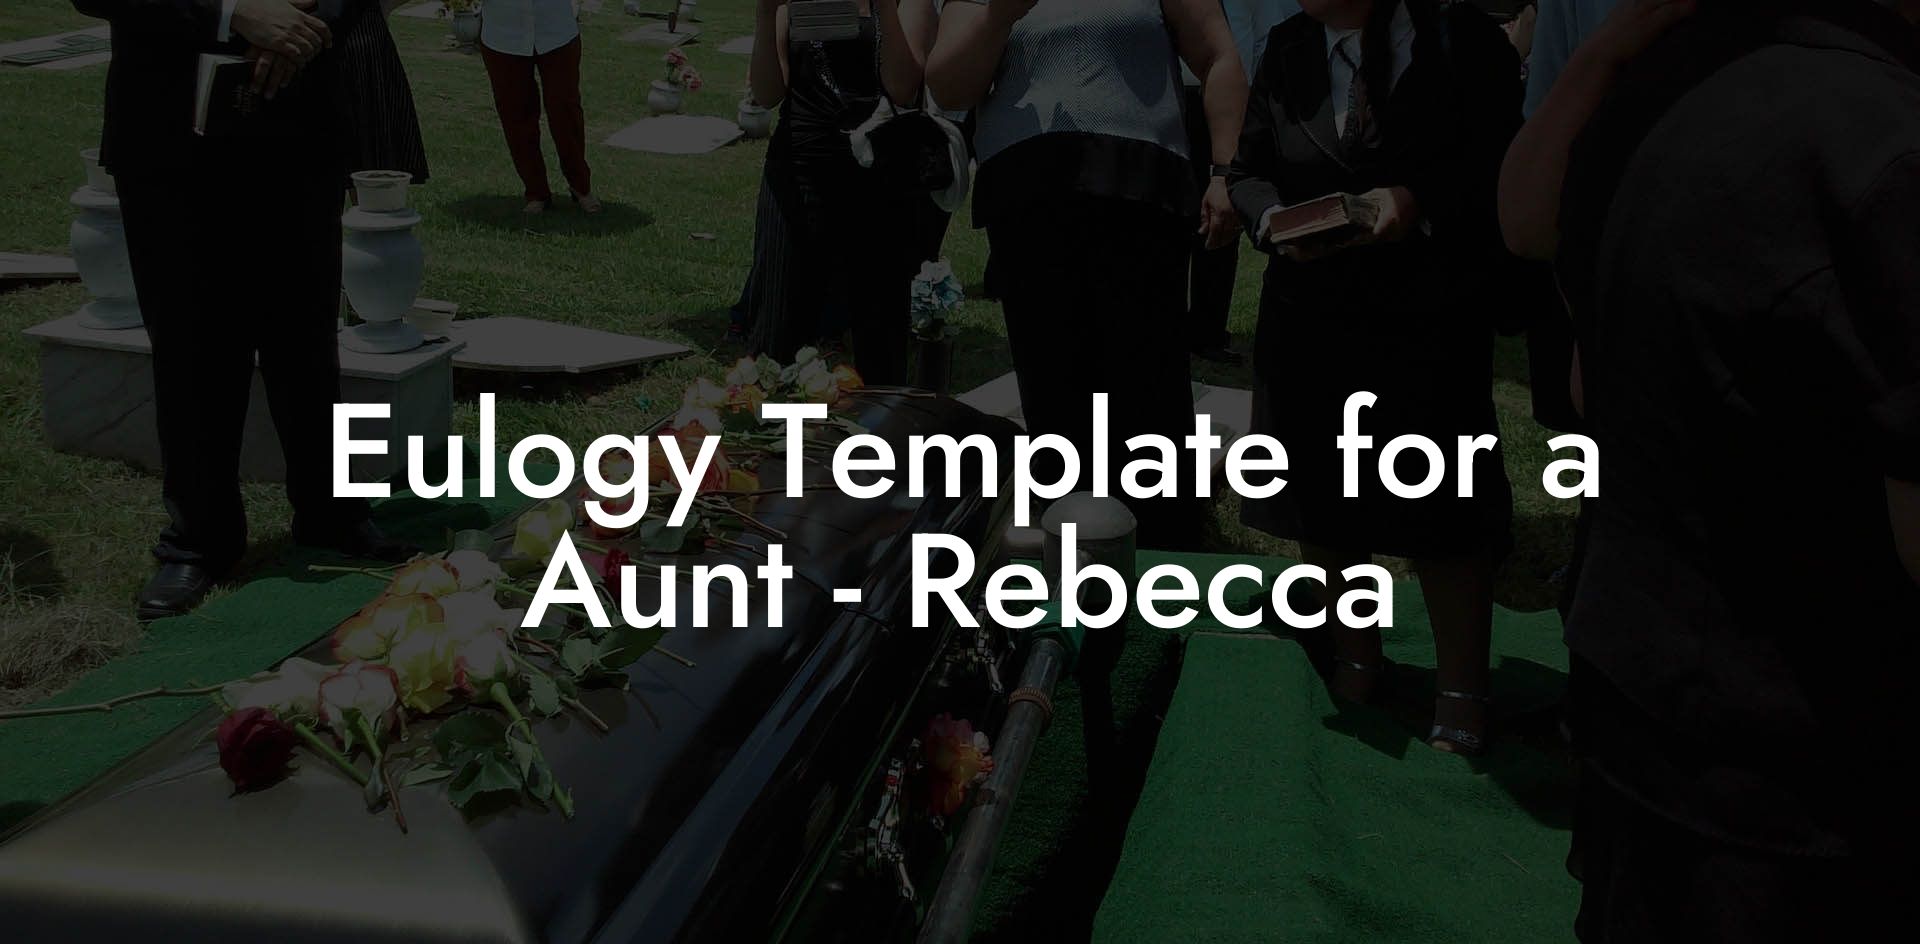 Eulogy Template for a Aunt - Rebecca